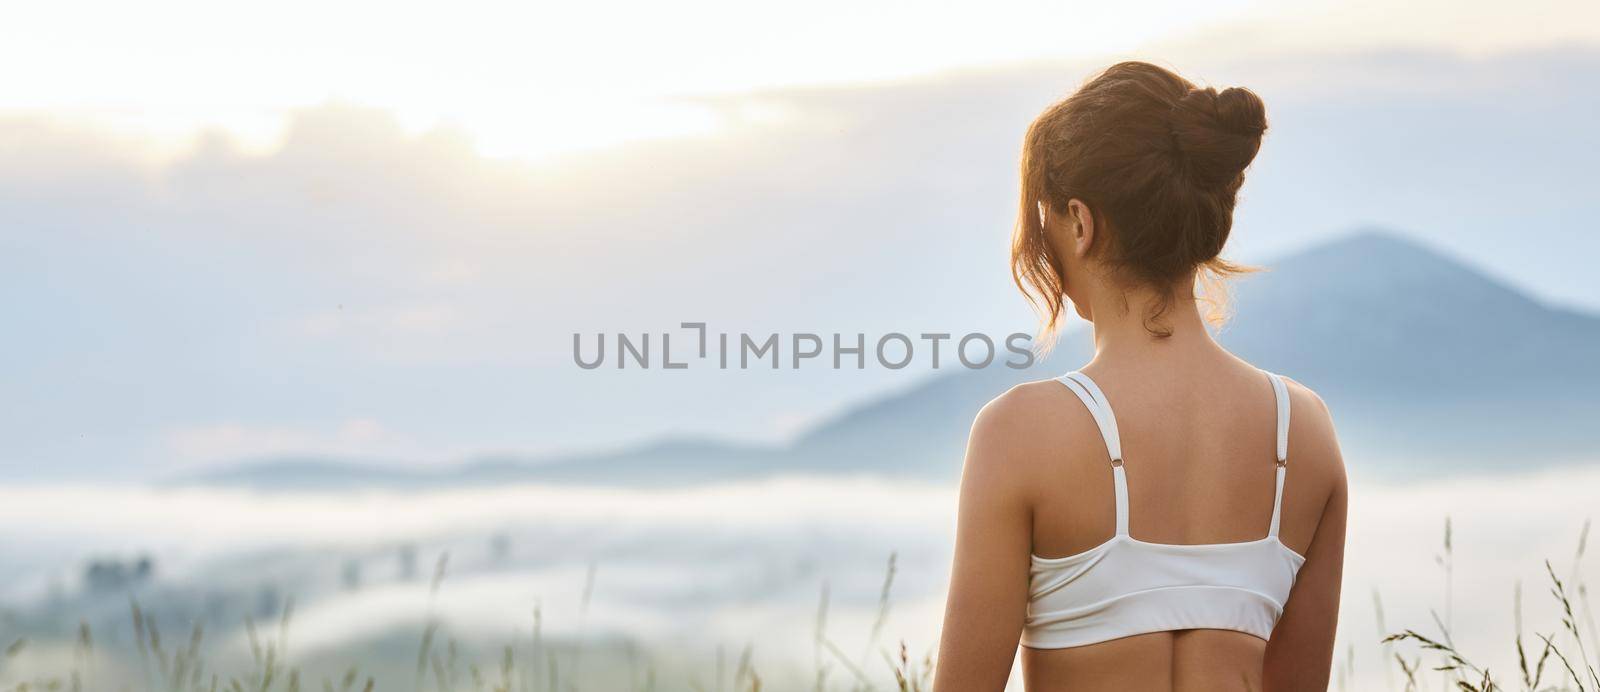 Back panoramic view of woman looking forward in hills. Female with hair bun, wearing white top, enjoying beautiful landscape, dreaming. Concept of harmony with nature.